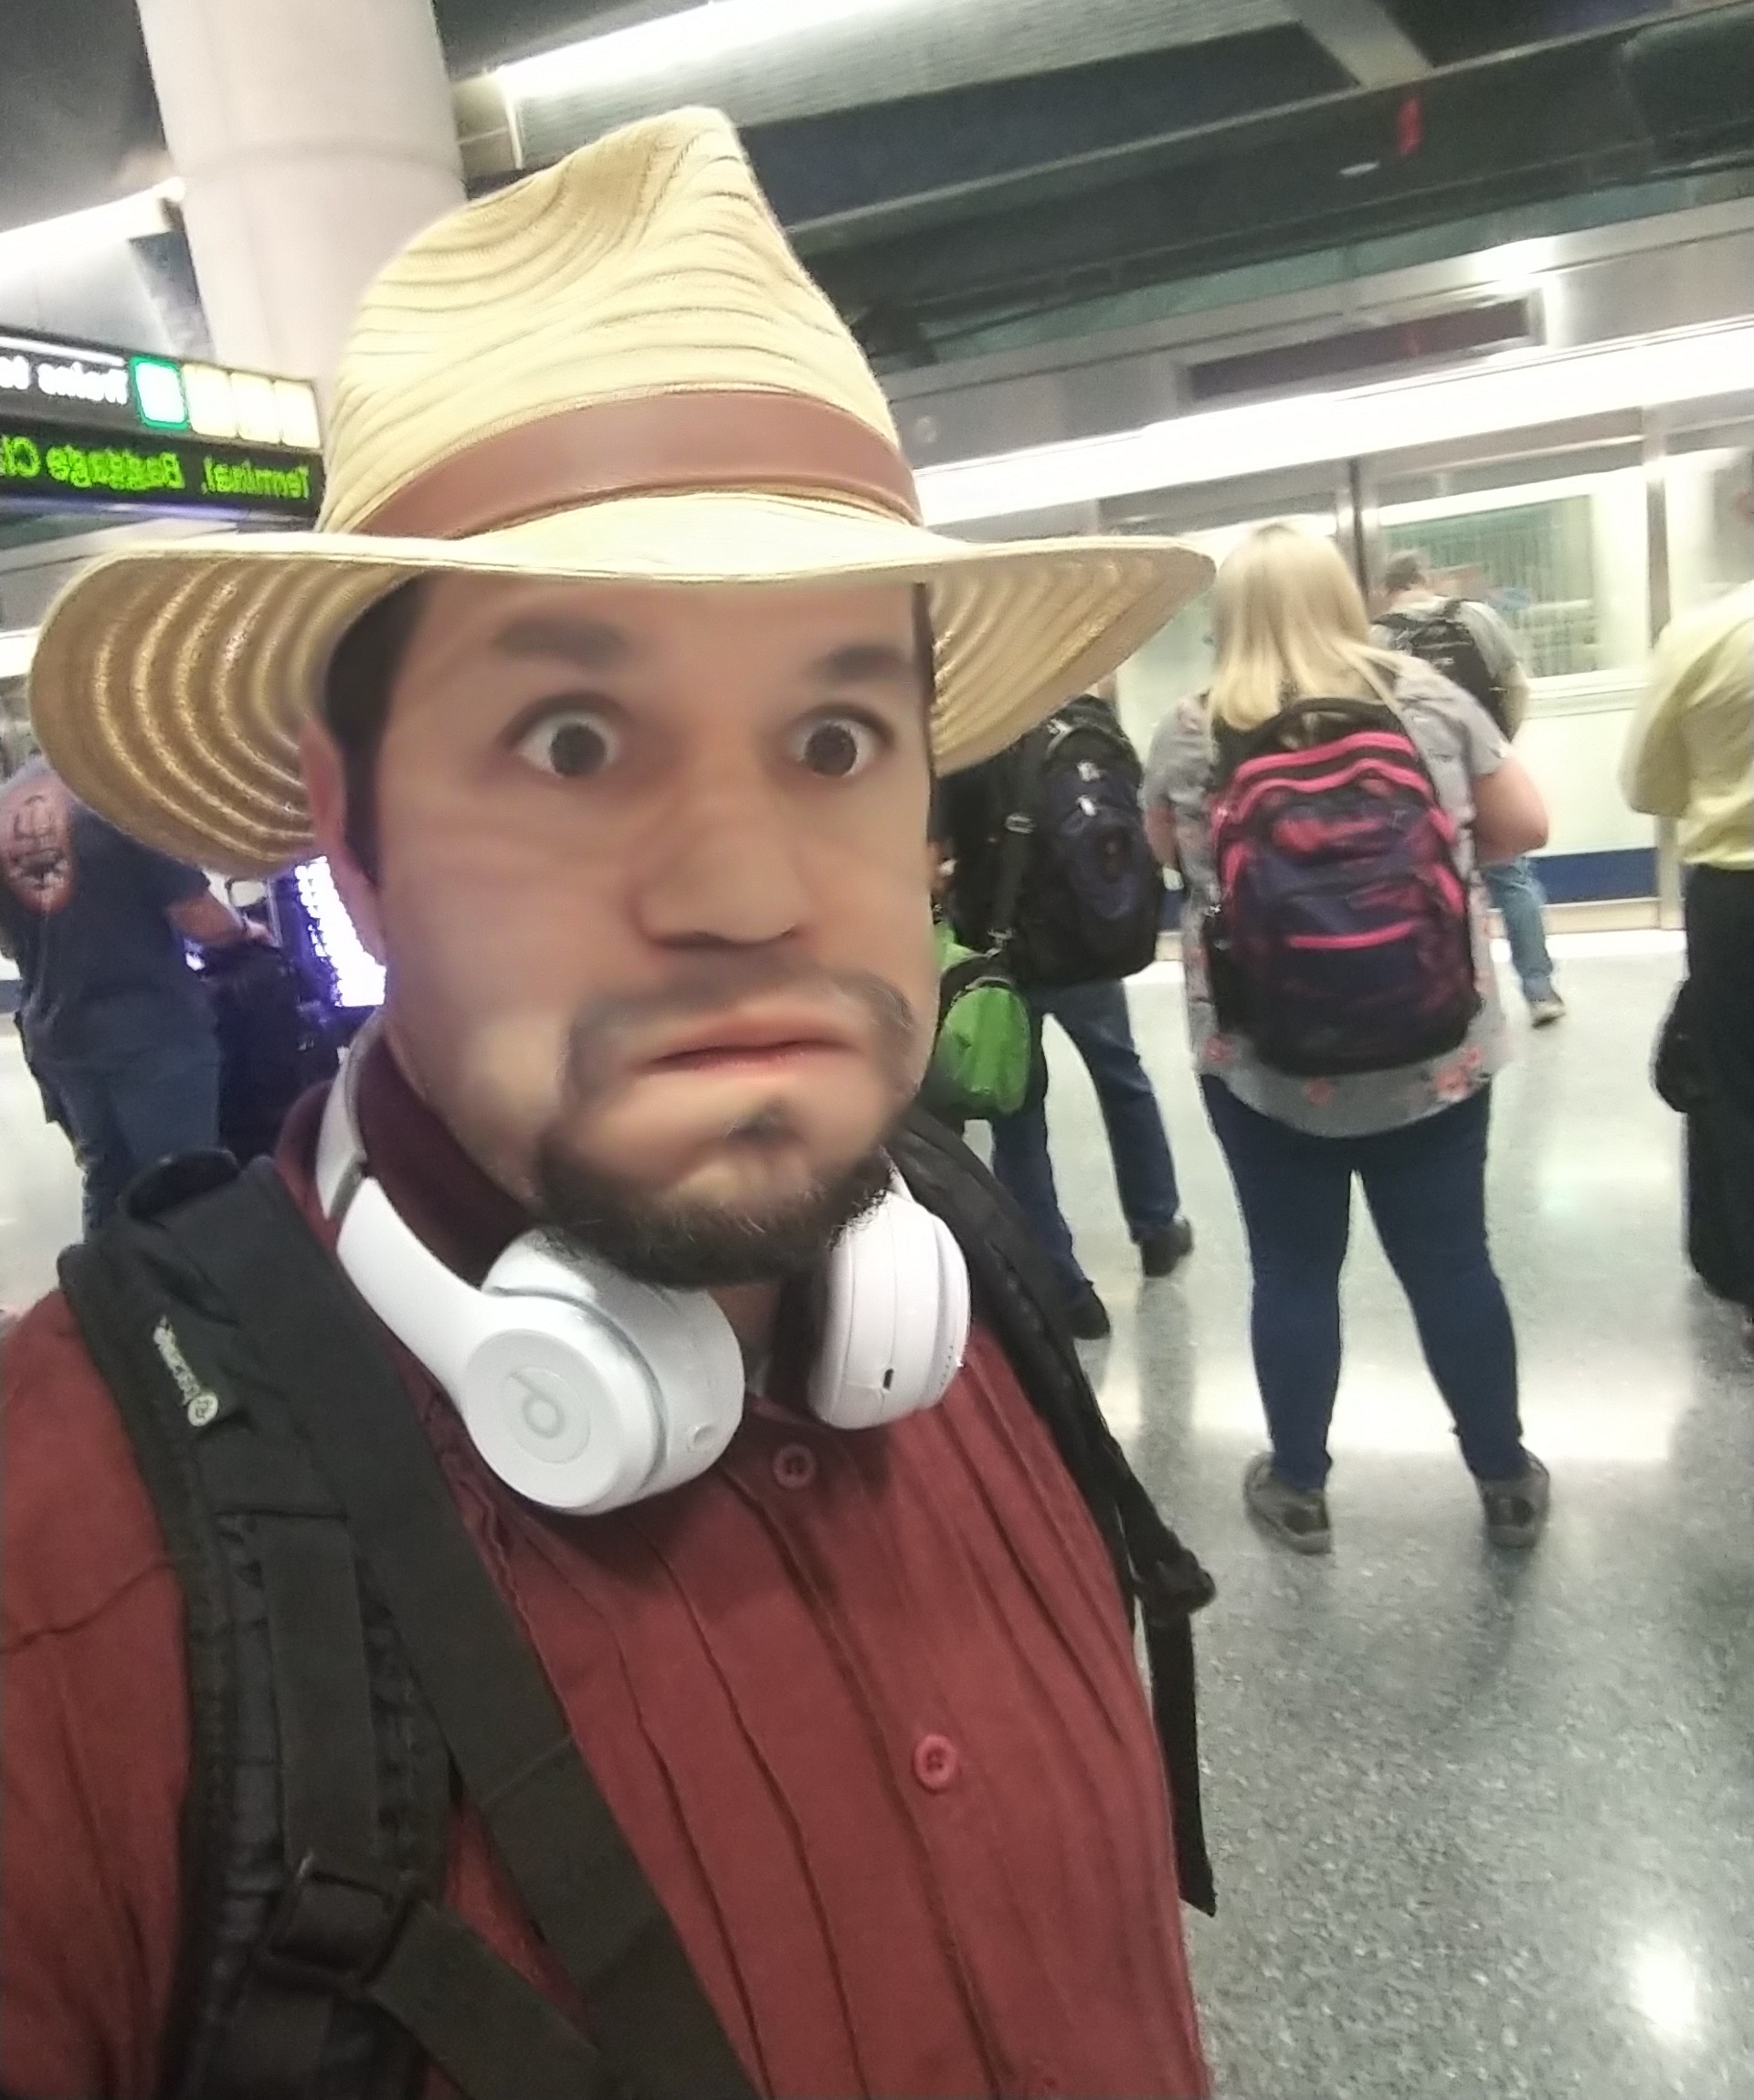 a man with a hat and headphones